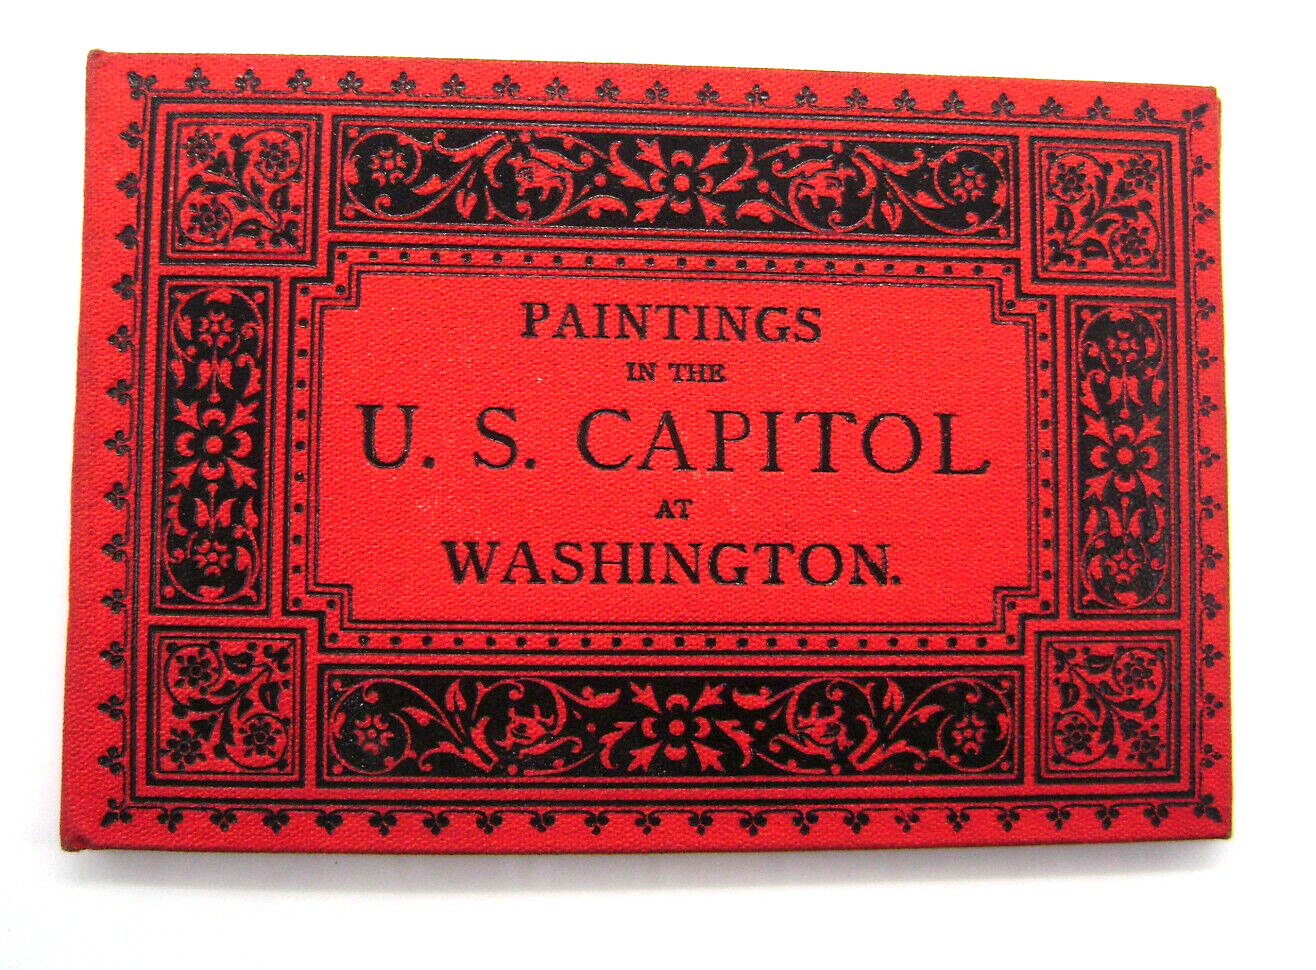 1885 Paintings In The U.S. Capitol At Washington Souvenir Mint Book by Wittemann